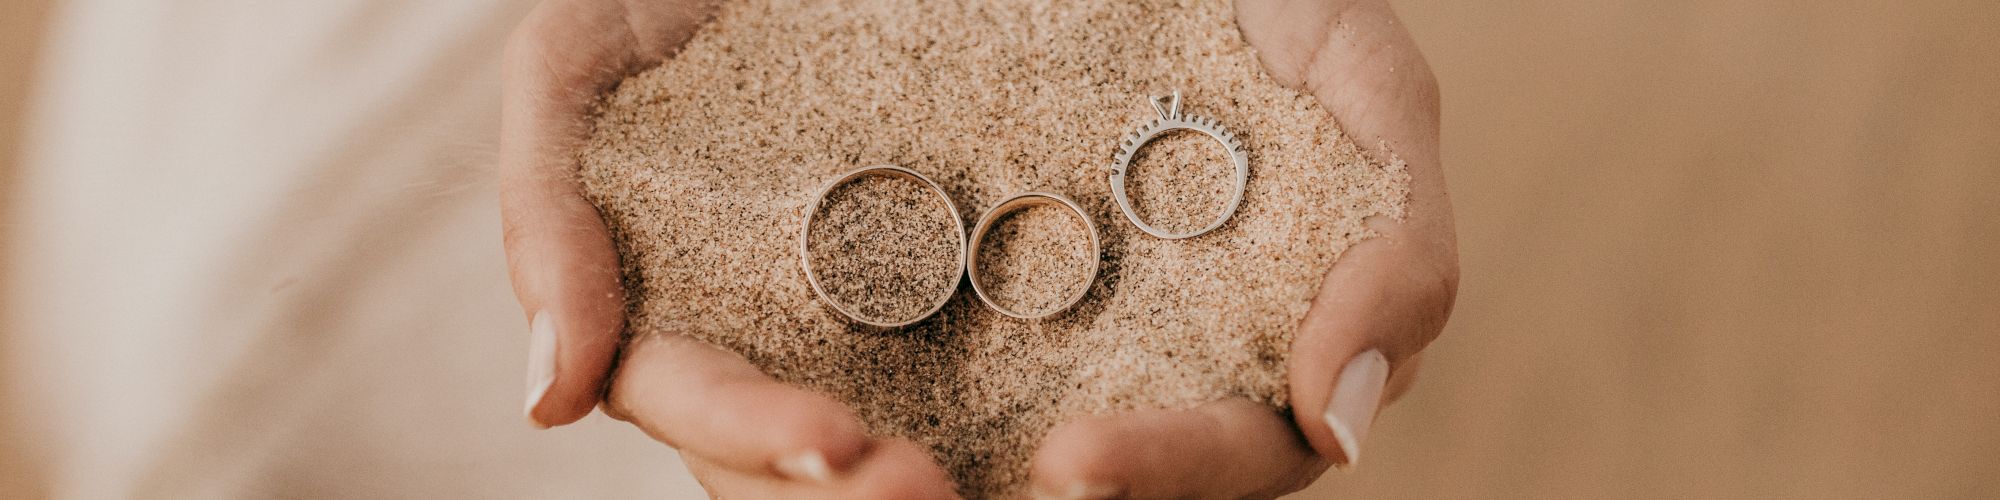 Hands holding sand with three rings.